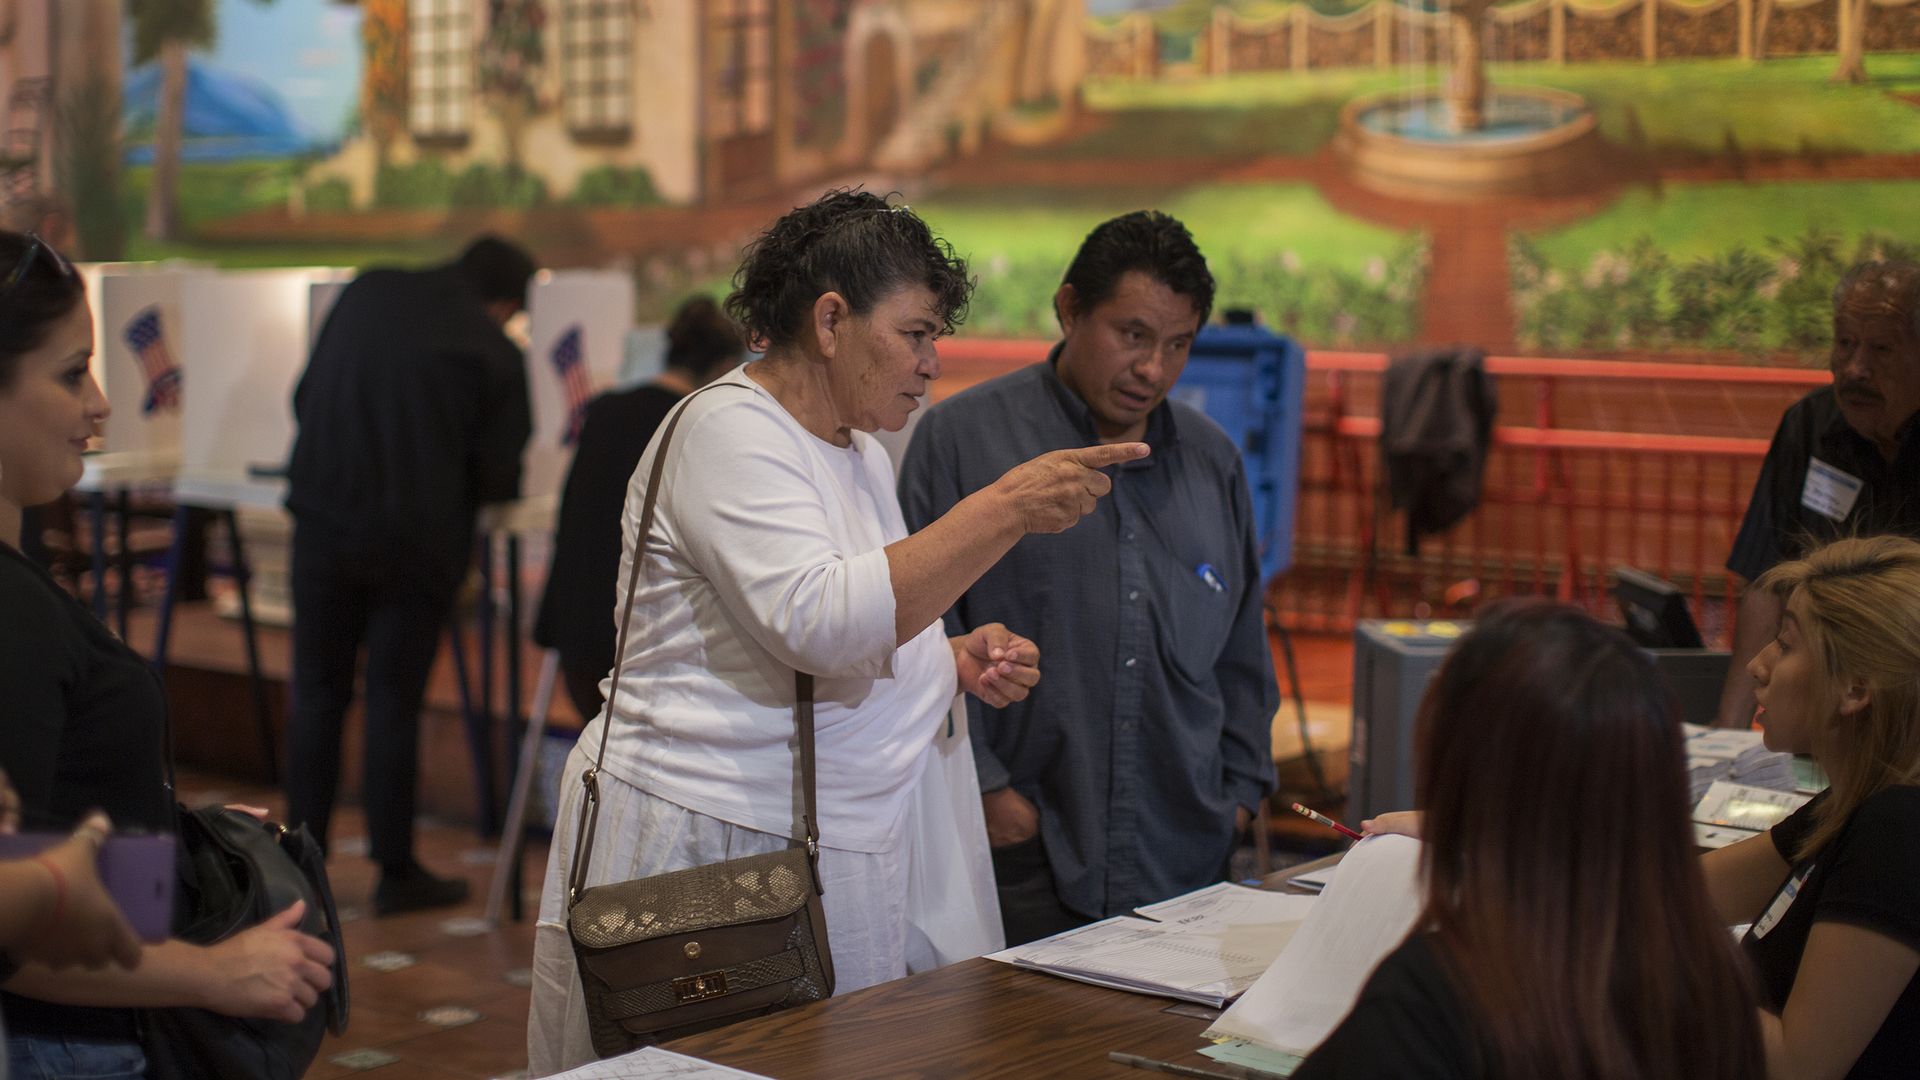  Latinos vote at a polling station in El Gallo Restaurant in 2016 in the Boyle Heights section of Los Angeles.